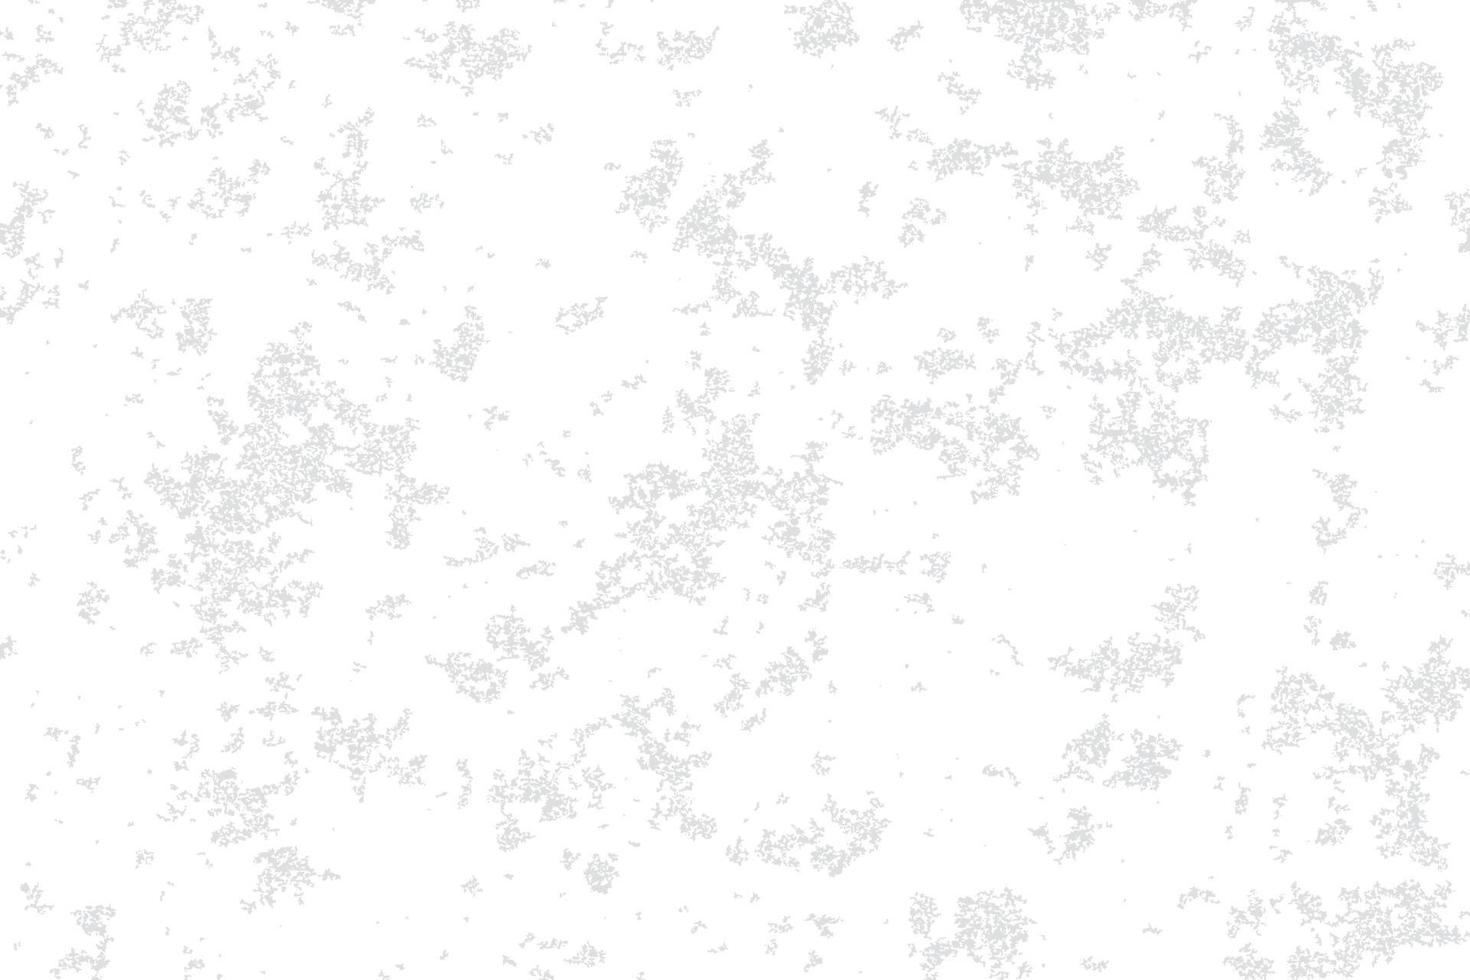 Abstract grunge background white and gray color with retro style. Vector illustration.